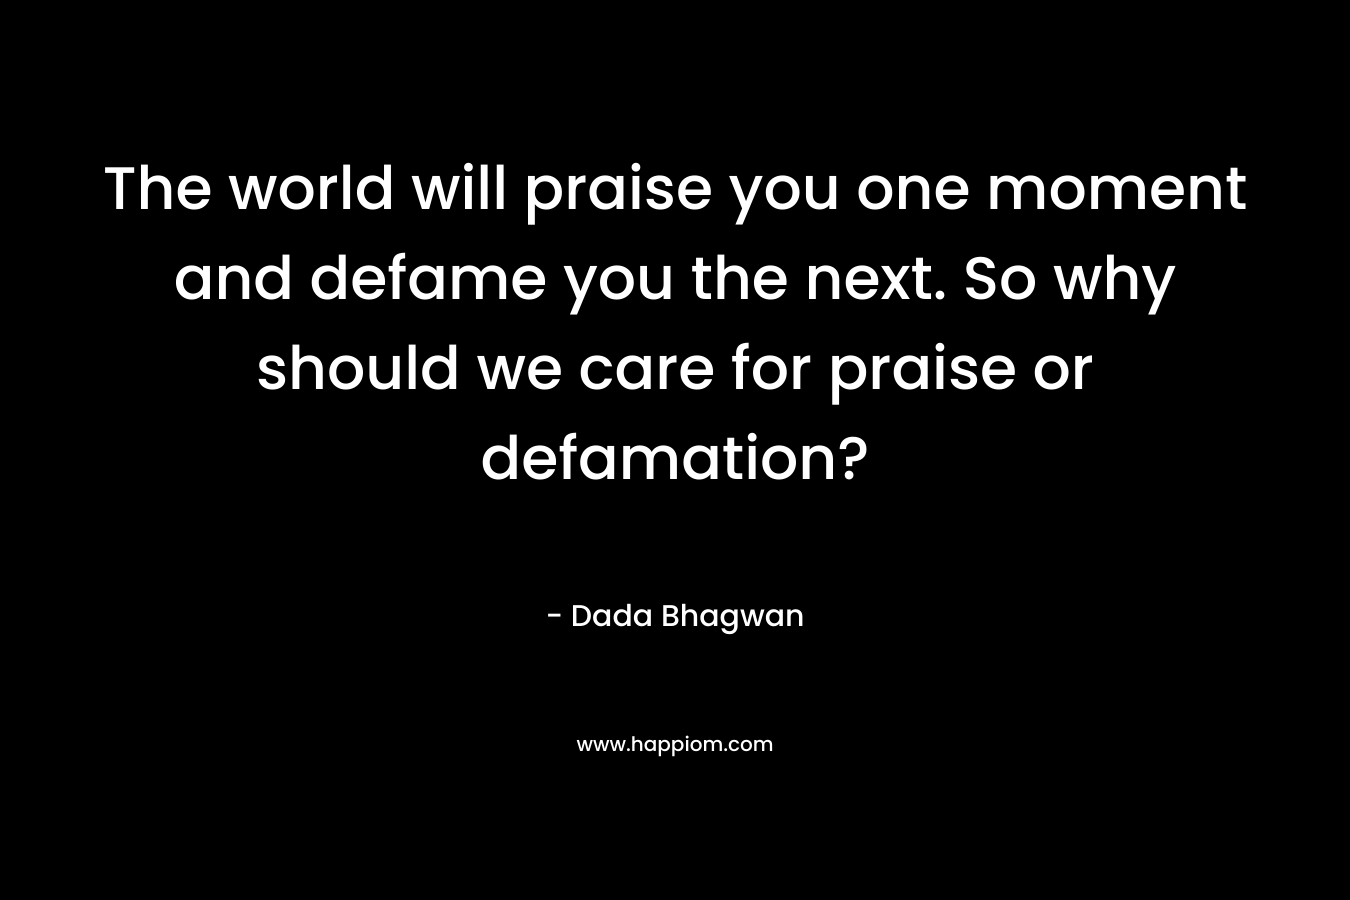 The world will praise you one moment and defame you the next. So why should we care for praise or defamation? – Dada Bhagwan